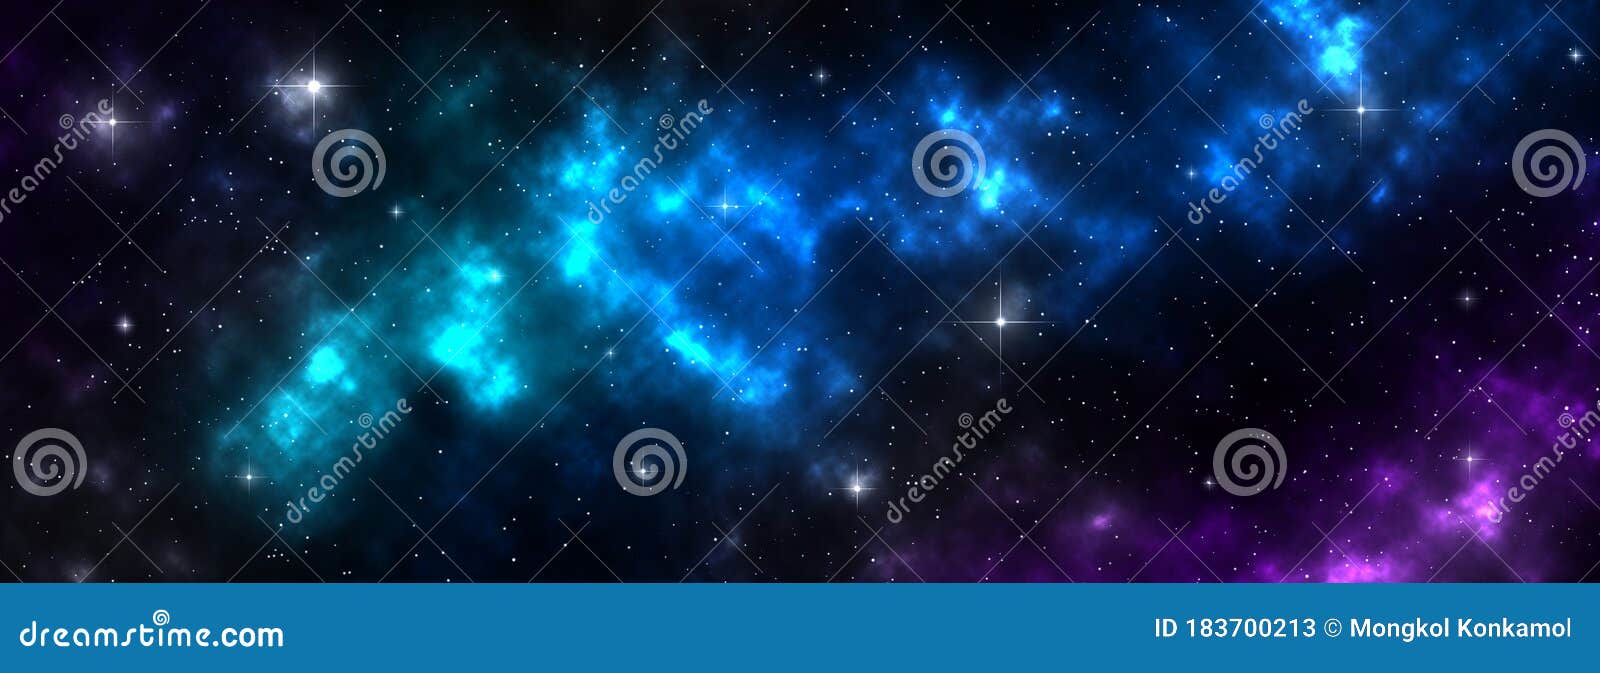 Wallpaper Pink And Blue Galaxy Background